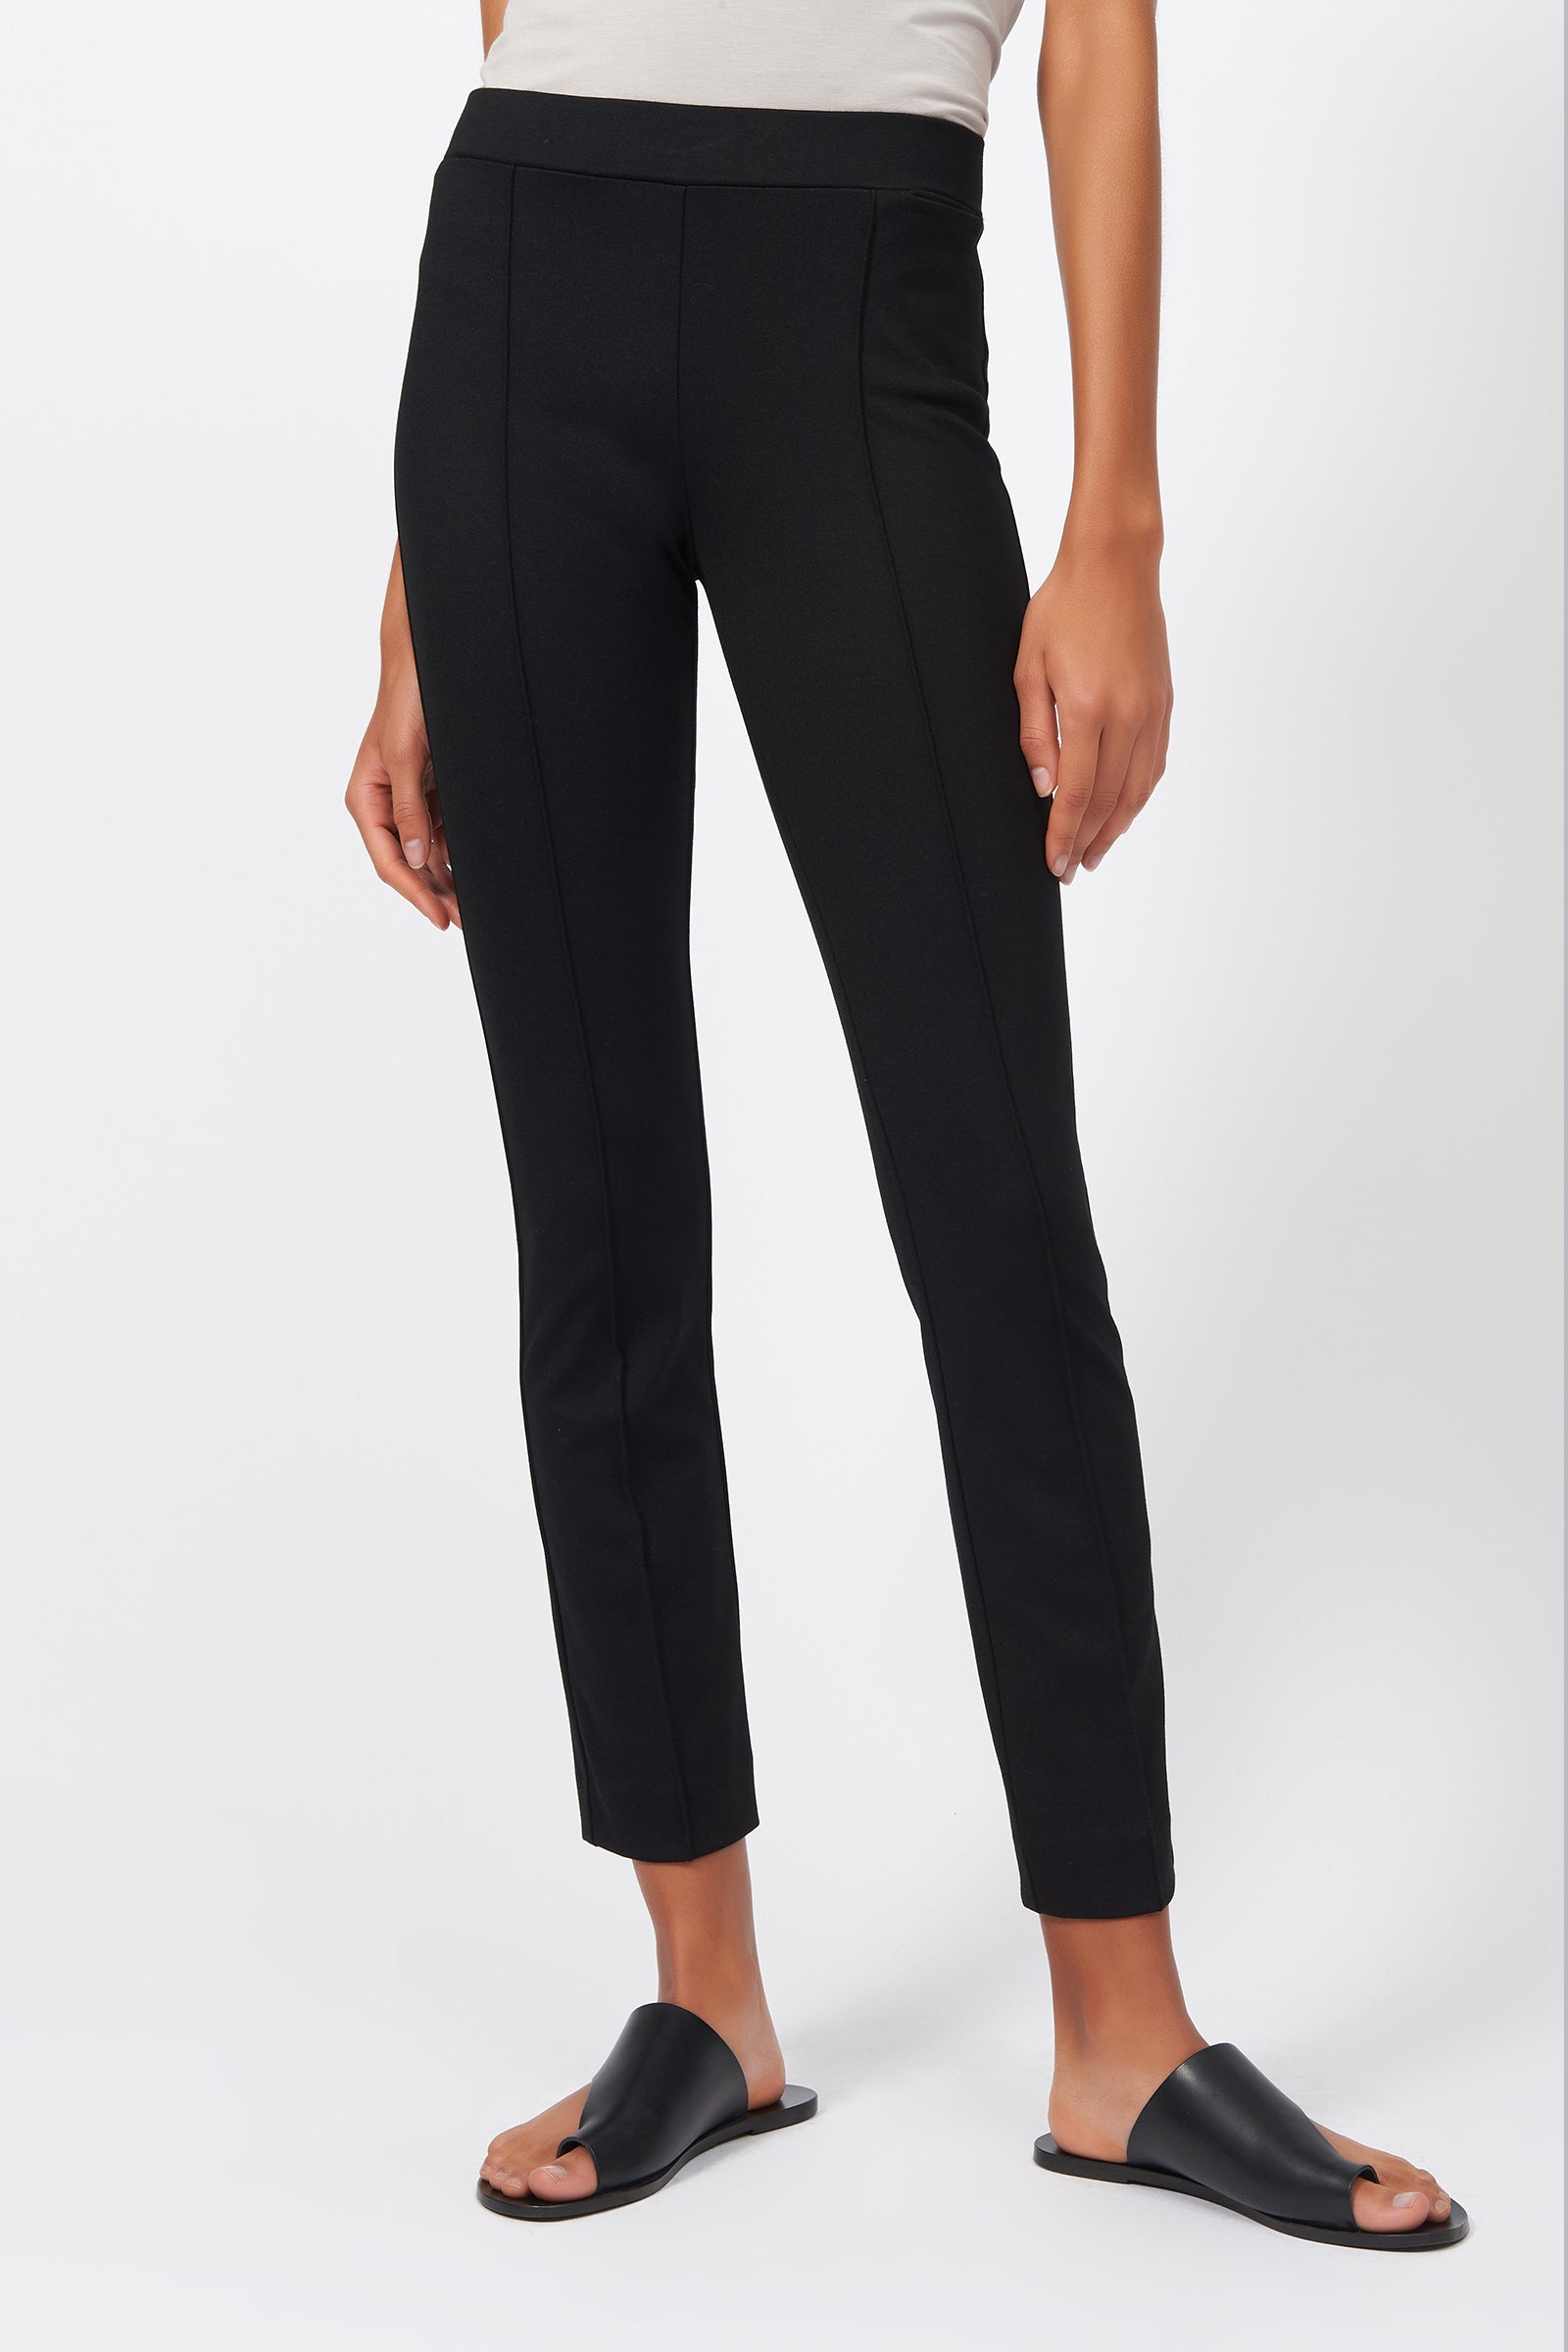 Kal Rieman Pintuck Ponte Ankle Pant in Black on Model Front Detail View